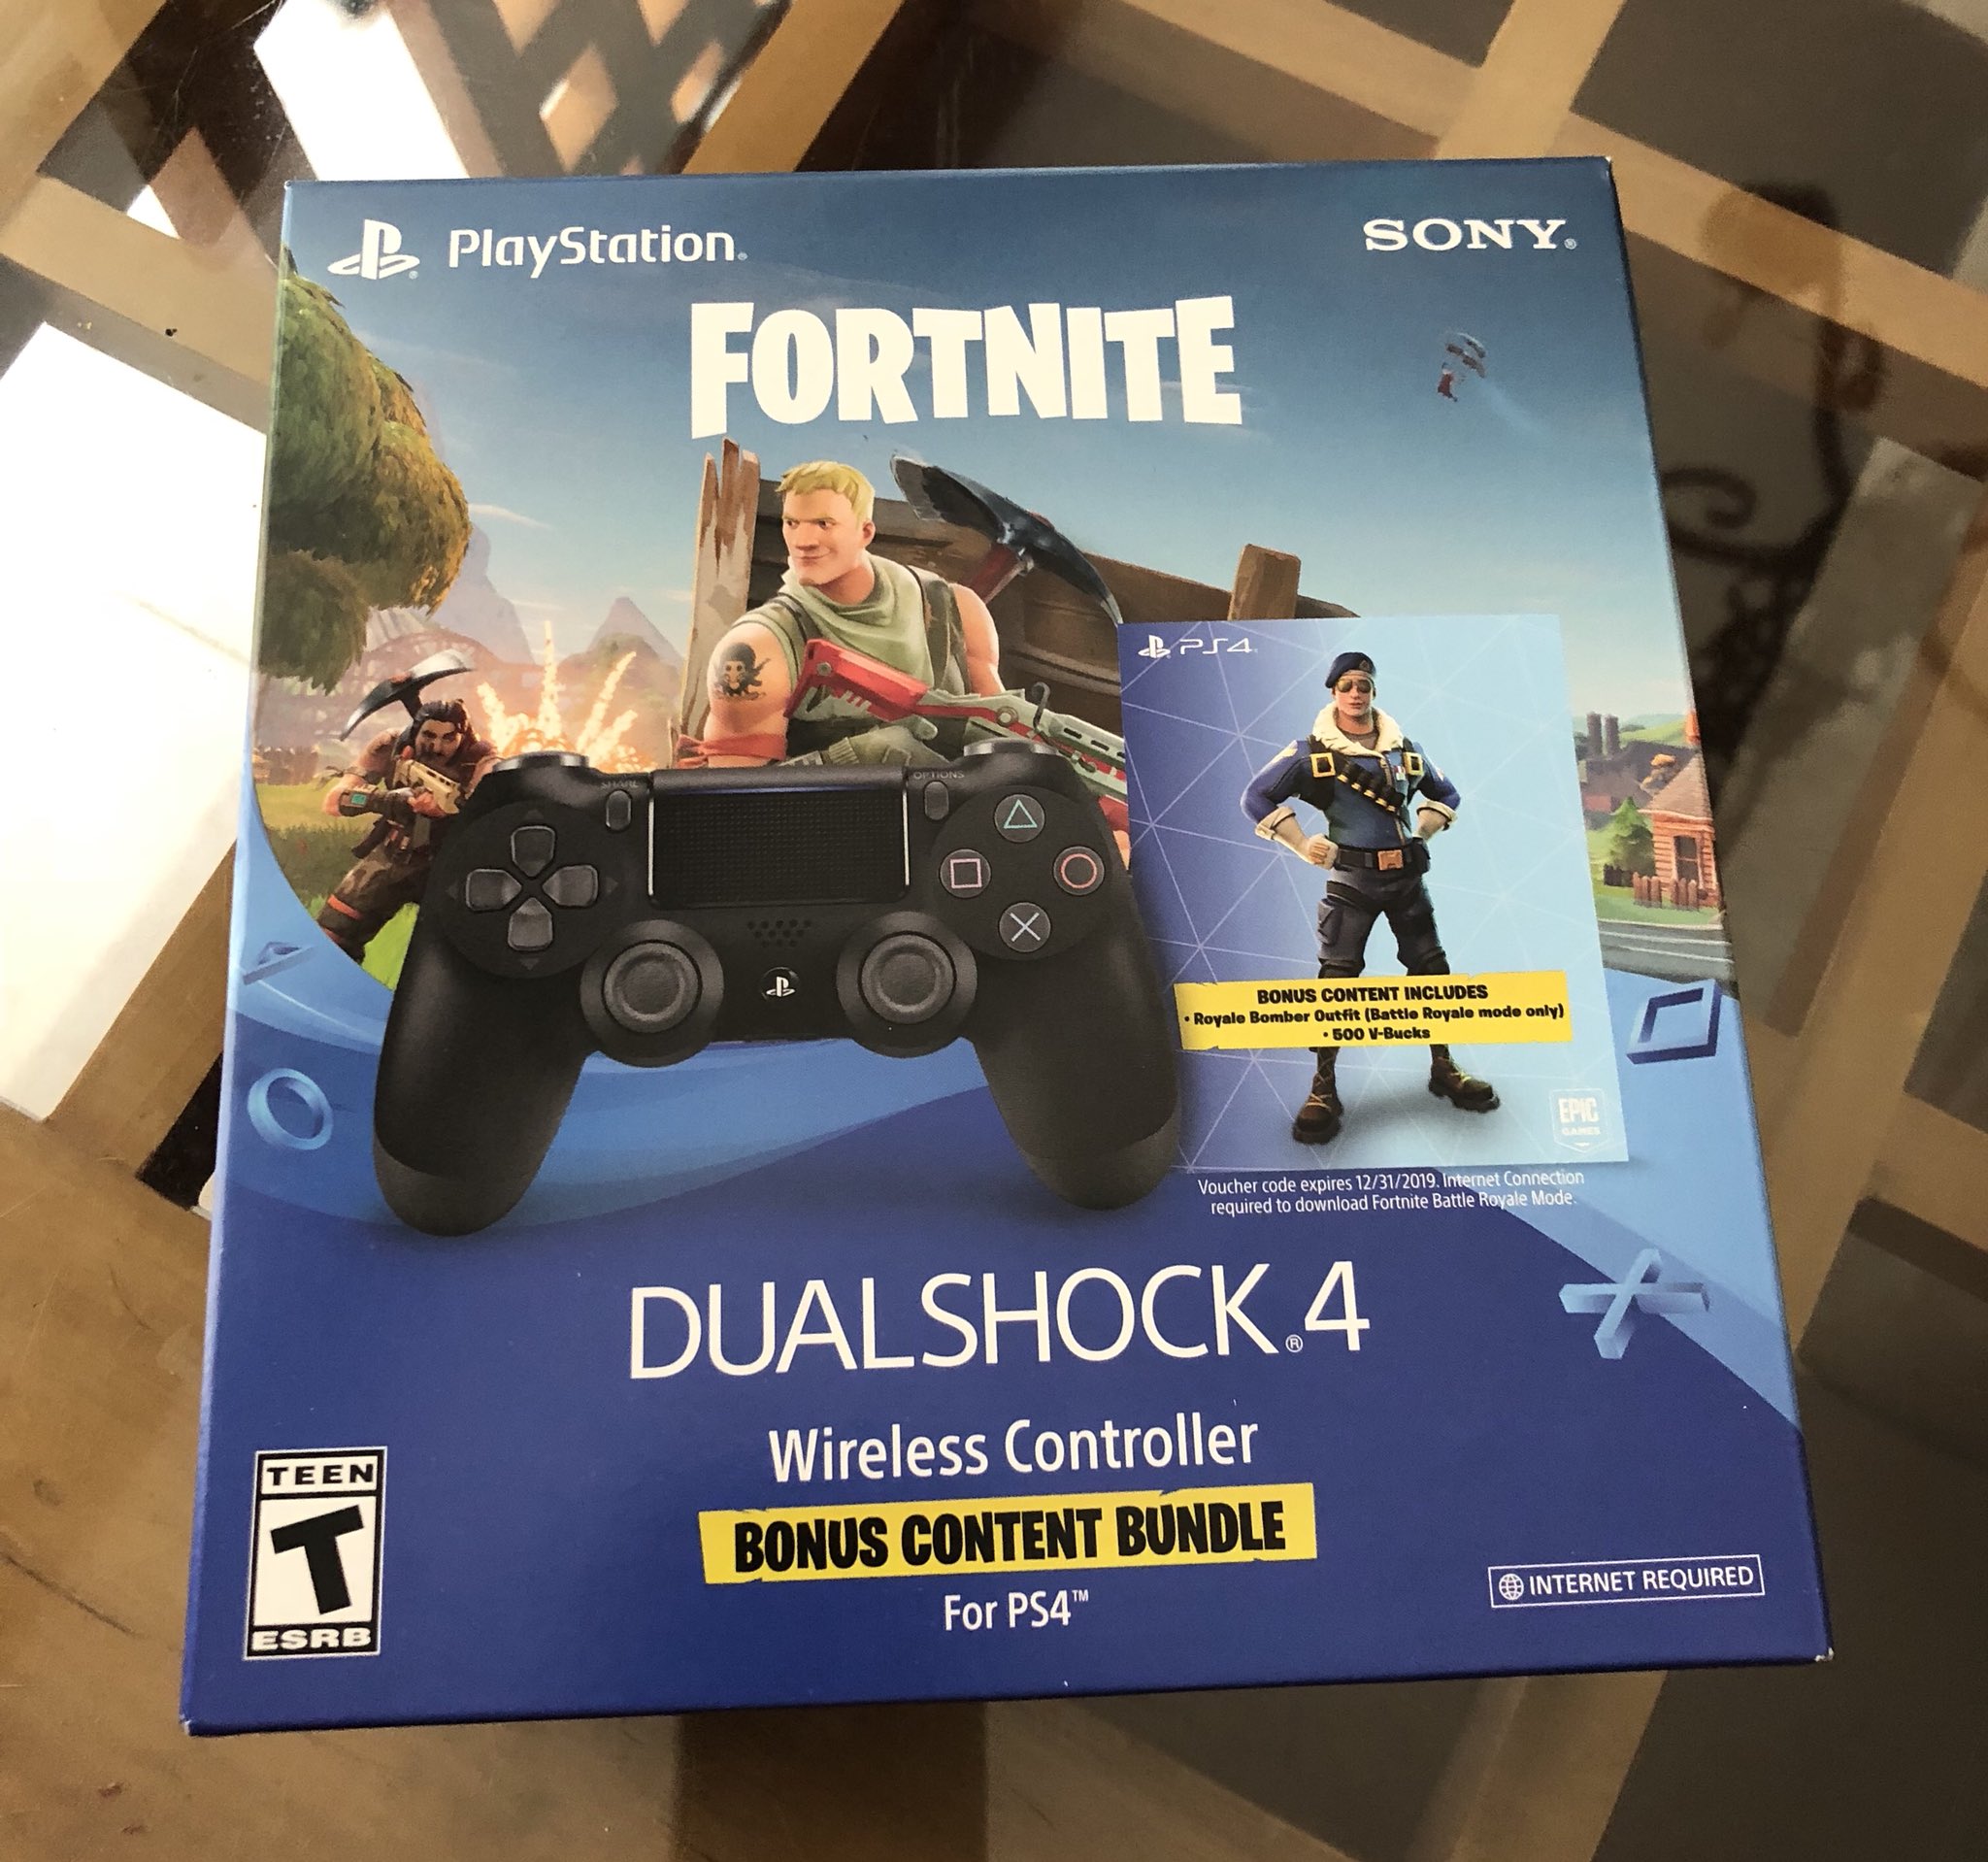 Marz on "I have an extra PS4 Fortnite bundle lying around, comes with the Royale Bomber 👀... 100 likes on this tweet and I'll give it away! https://t.co/bHKcZNduGn" / Twitter